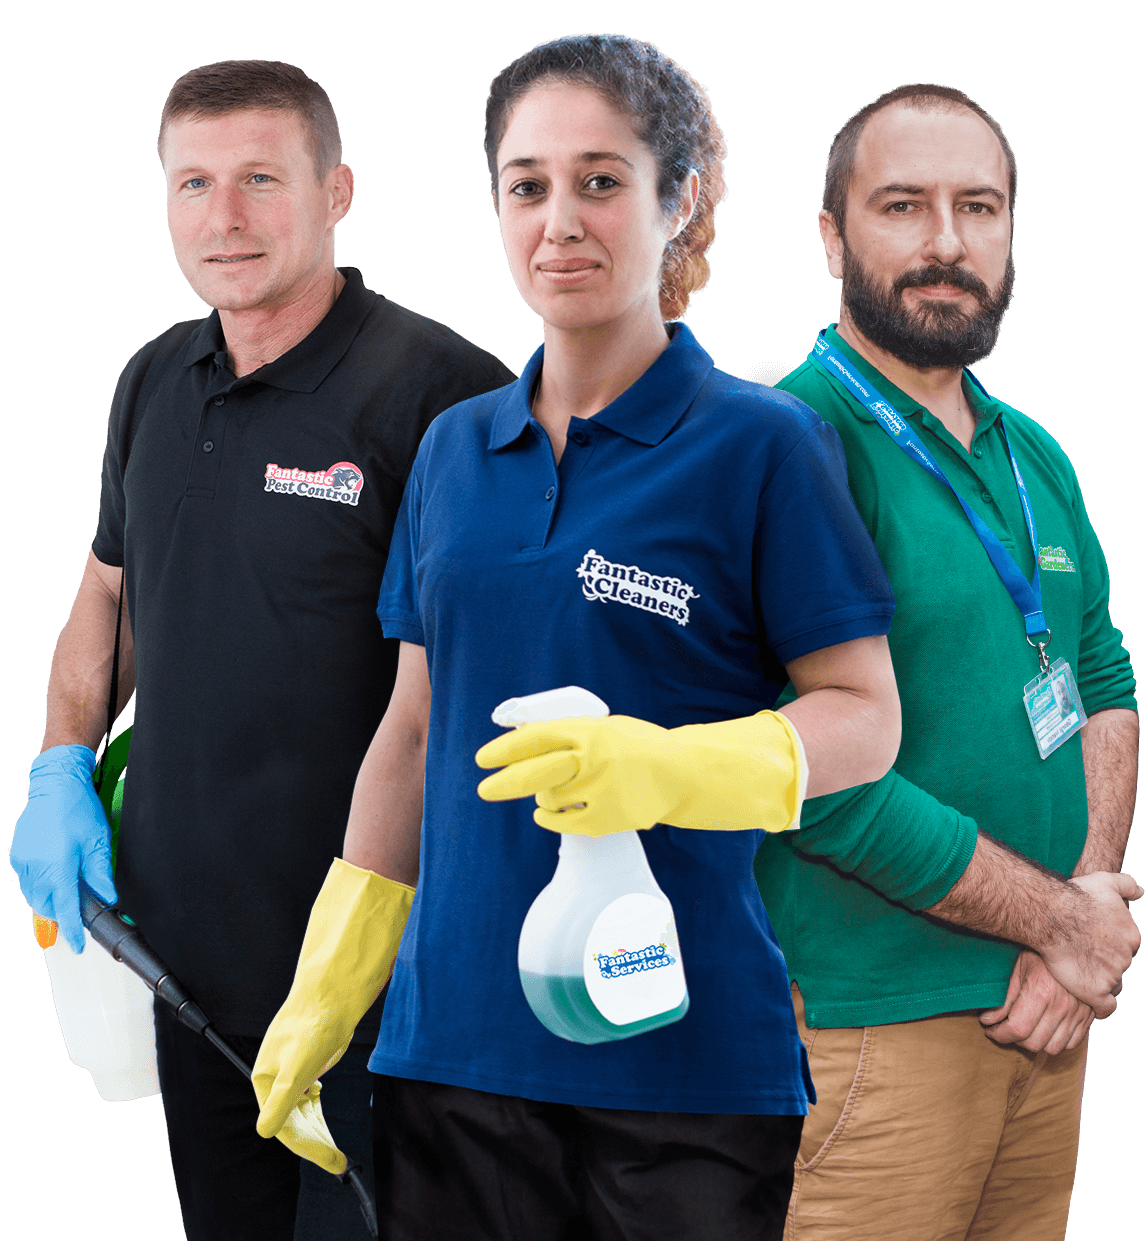 Pest control, gardening and cleaning professionals